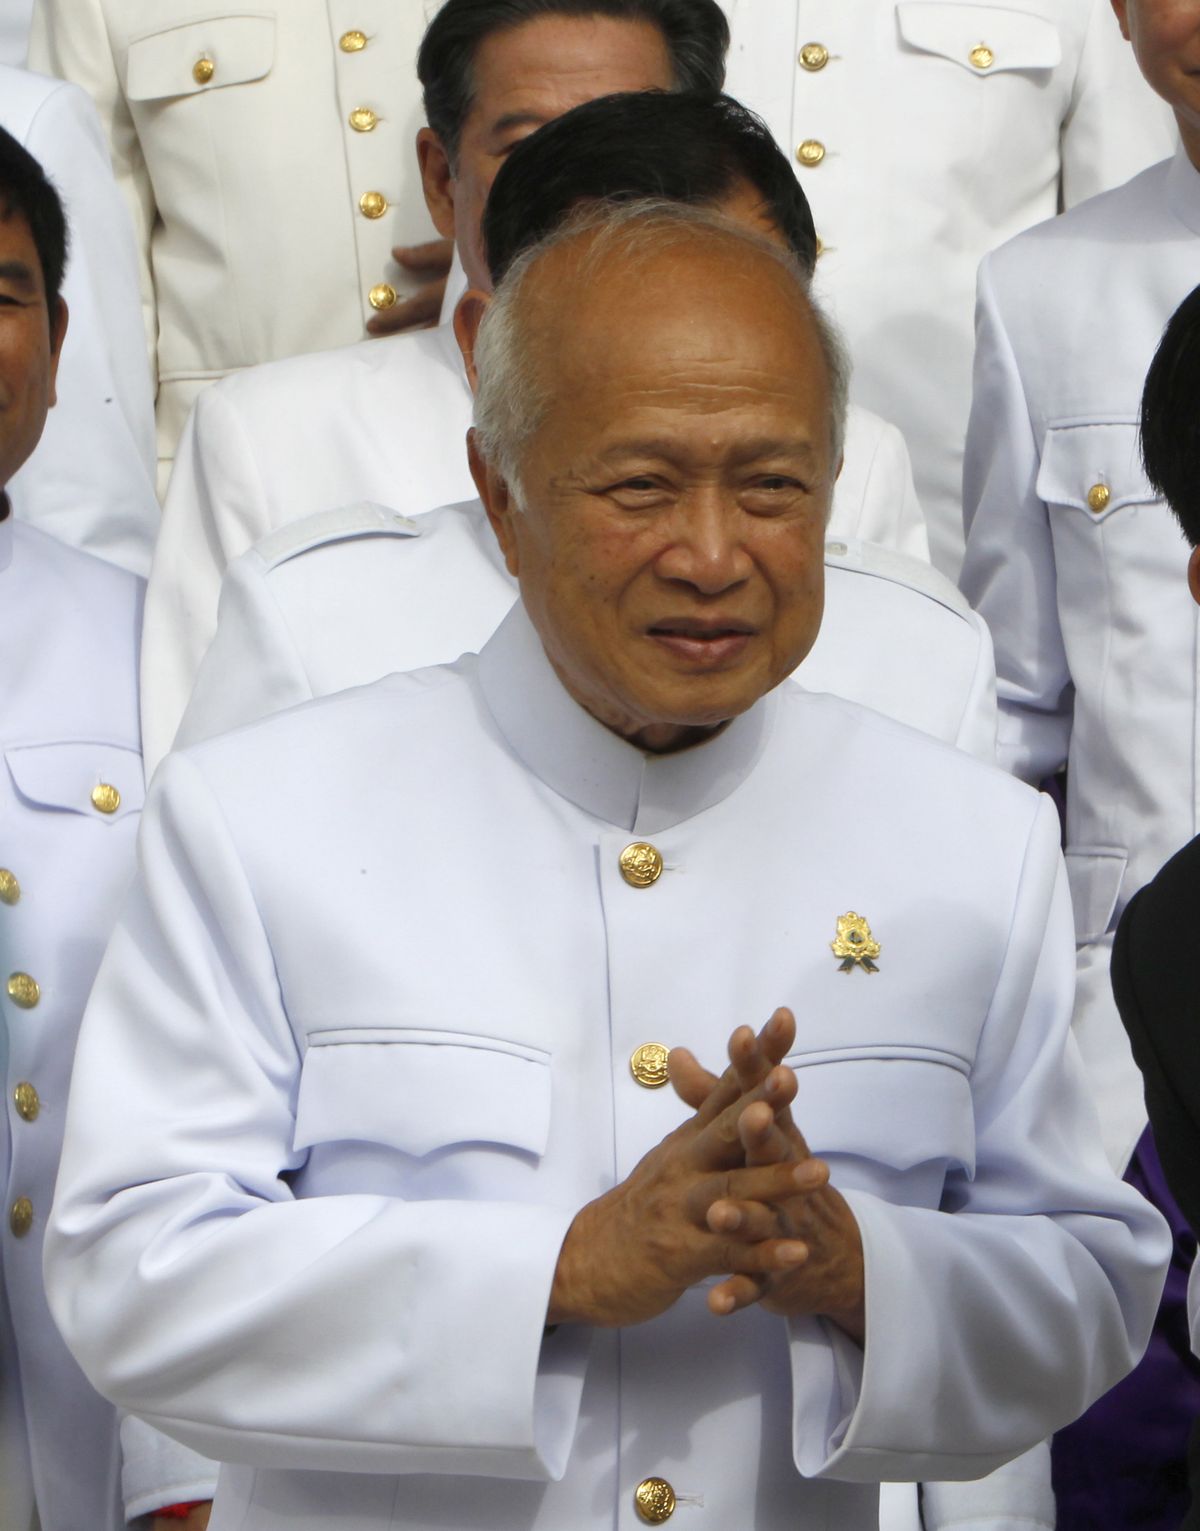 Prince Norodom Ranariddh and the royal FUNCIPEC Party walks together at the National Assembly, in Phnom Penh, Cambodia, Tuesday, Nov. 28, 2018. Ranariddh, former prime minister and the son of the late King Norodom Sihanouk, died Sunday, Nov. 28, 2021 in France, Information Minister Khieu Kanharith announced on his Facebook page. He was 77.  (Heng Sinith)